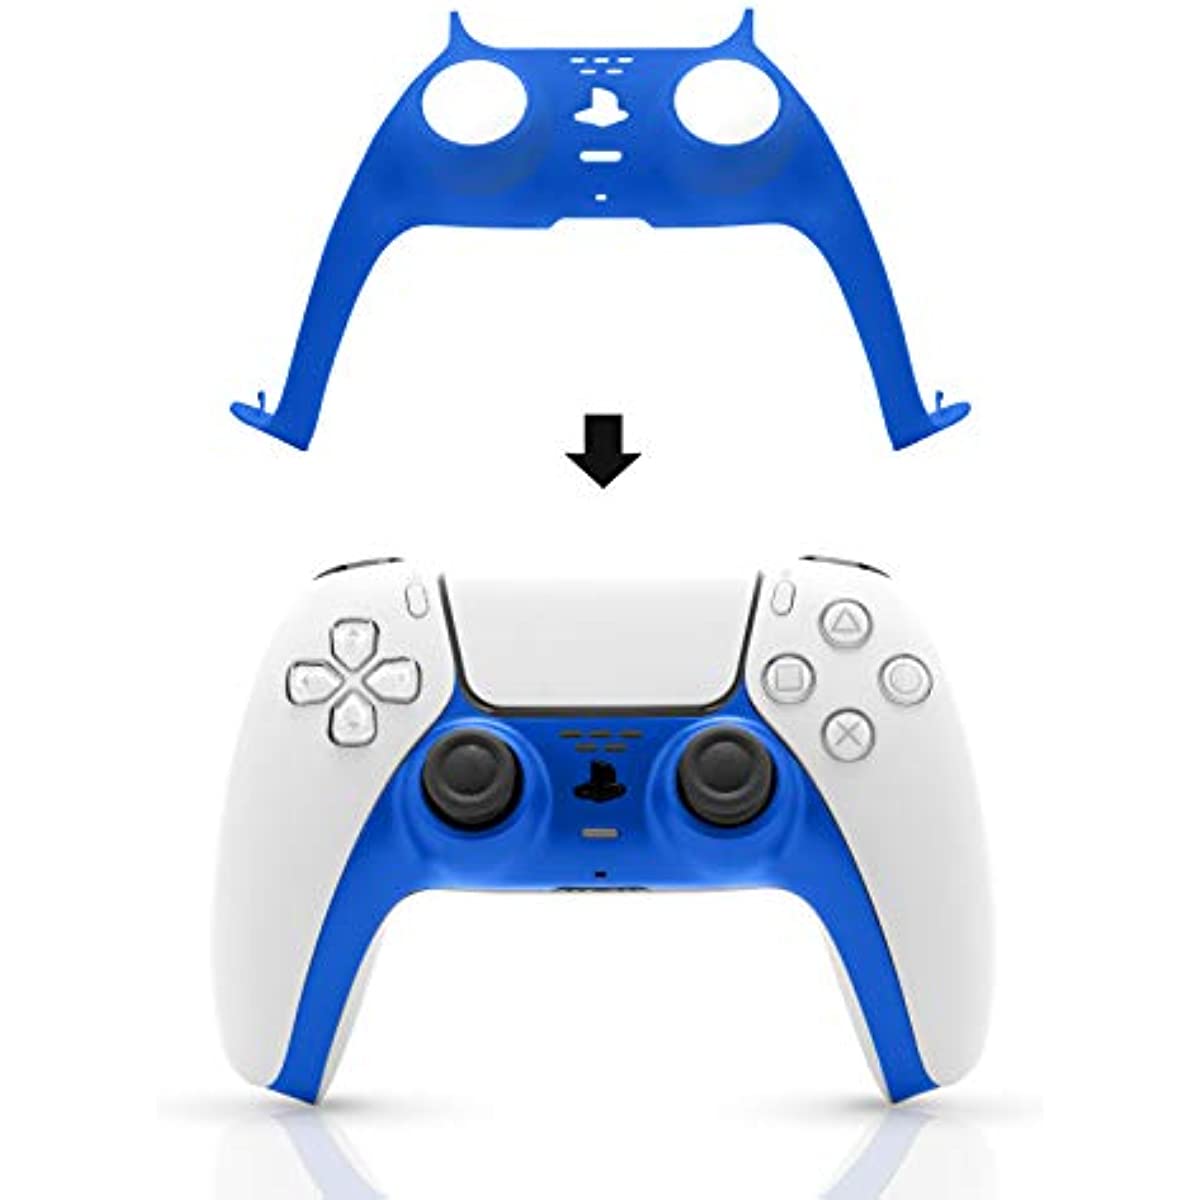 PS5 Controller Accessories, PS5 Controller Plates, PS5 Controller Faceplate 2 Pack - Green and Blue